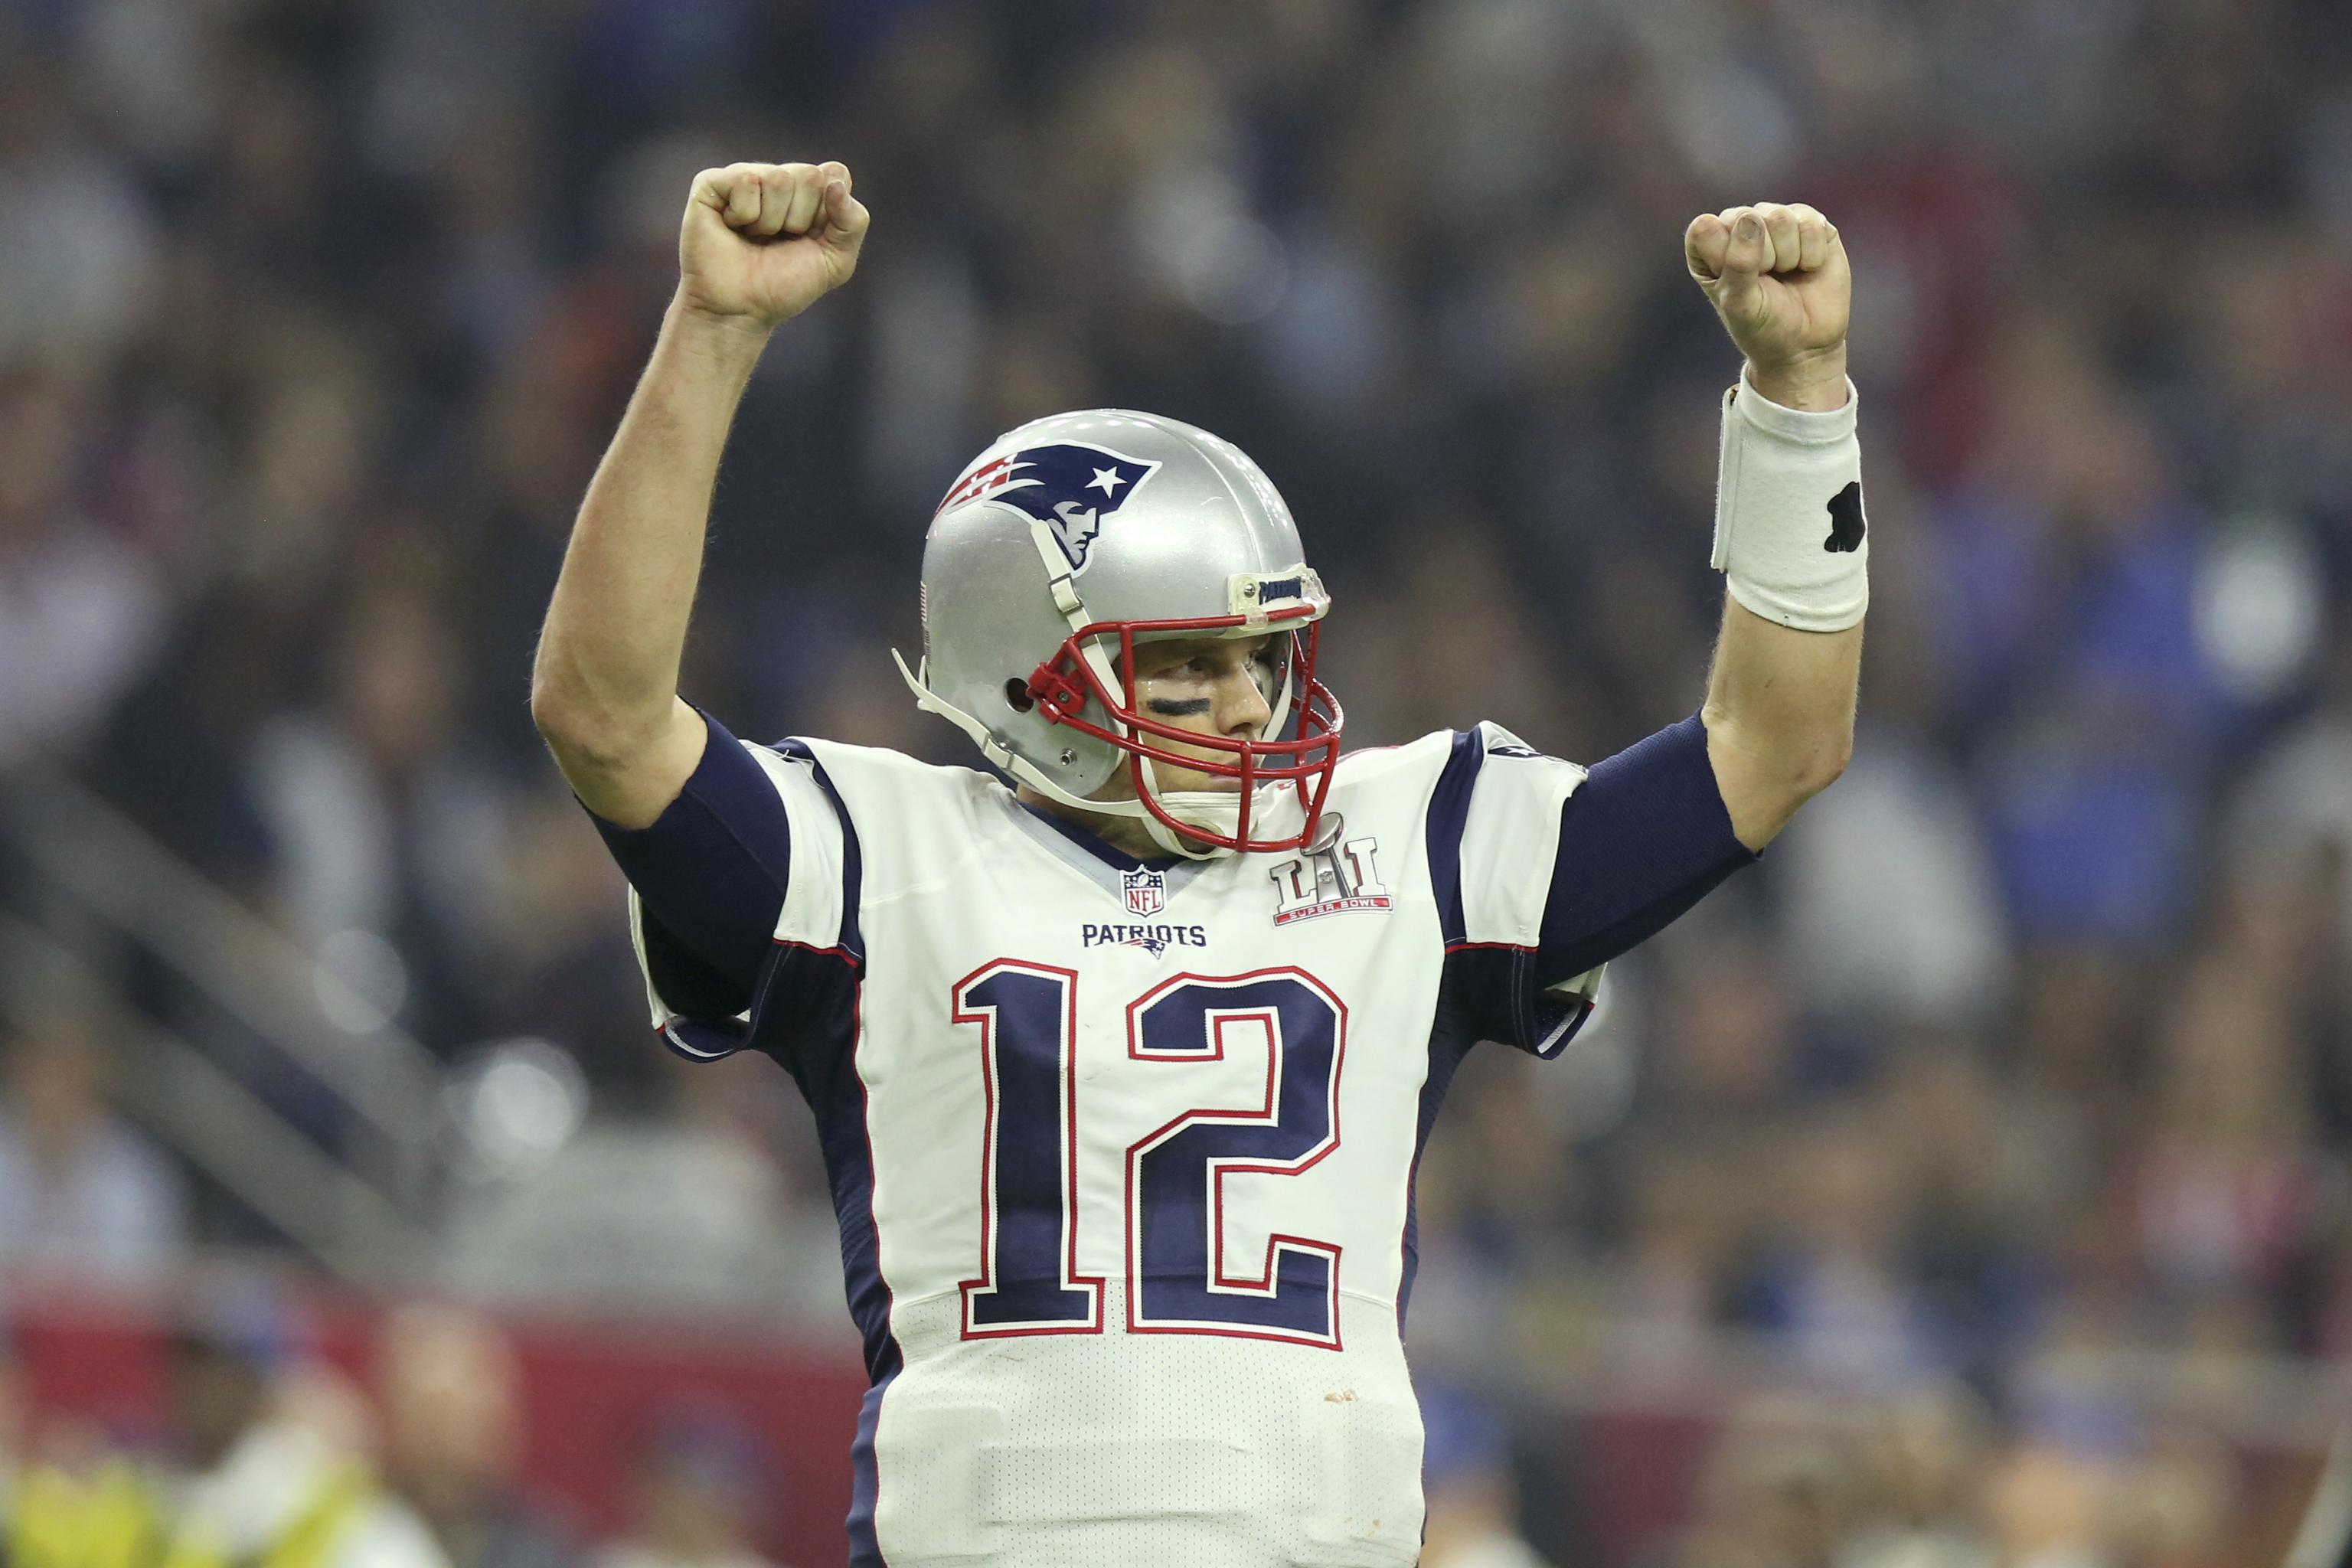 Patriots to Wear White Away Jerseys in Super Bowl 52 vs. Eagles